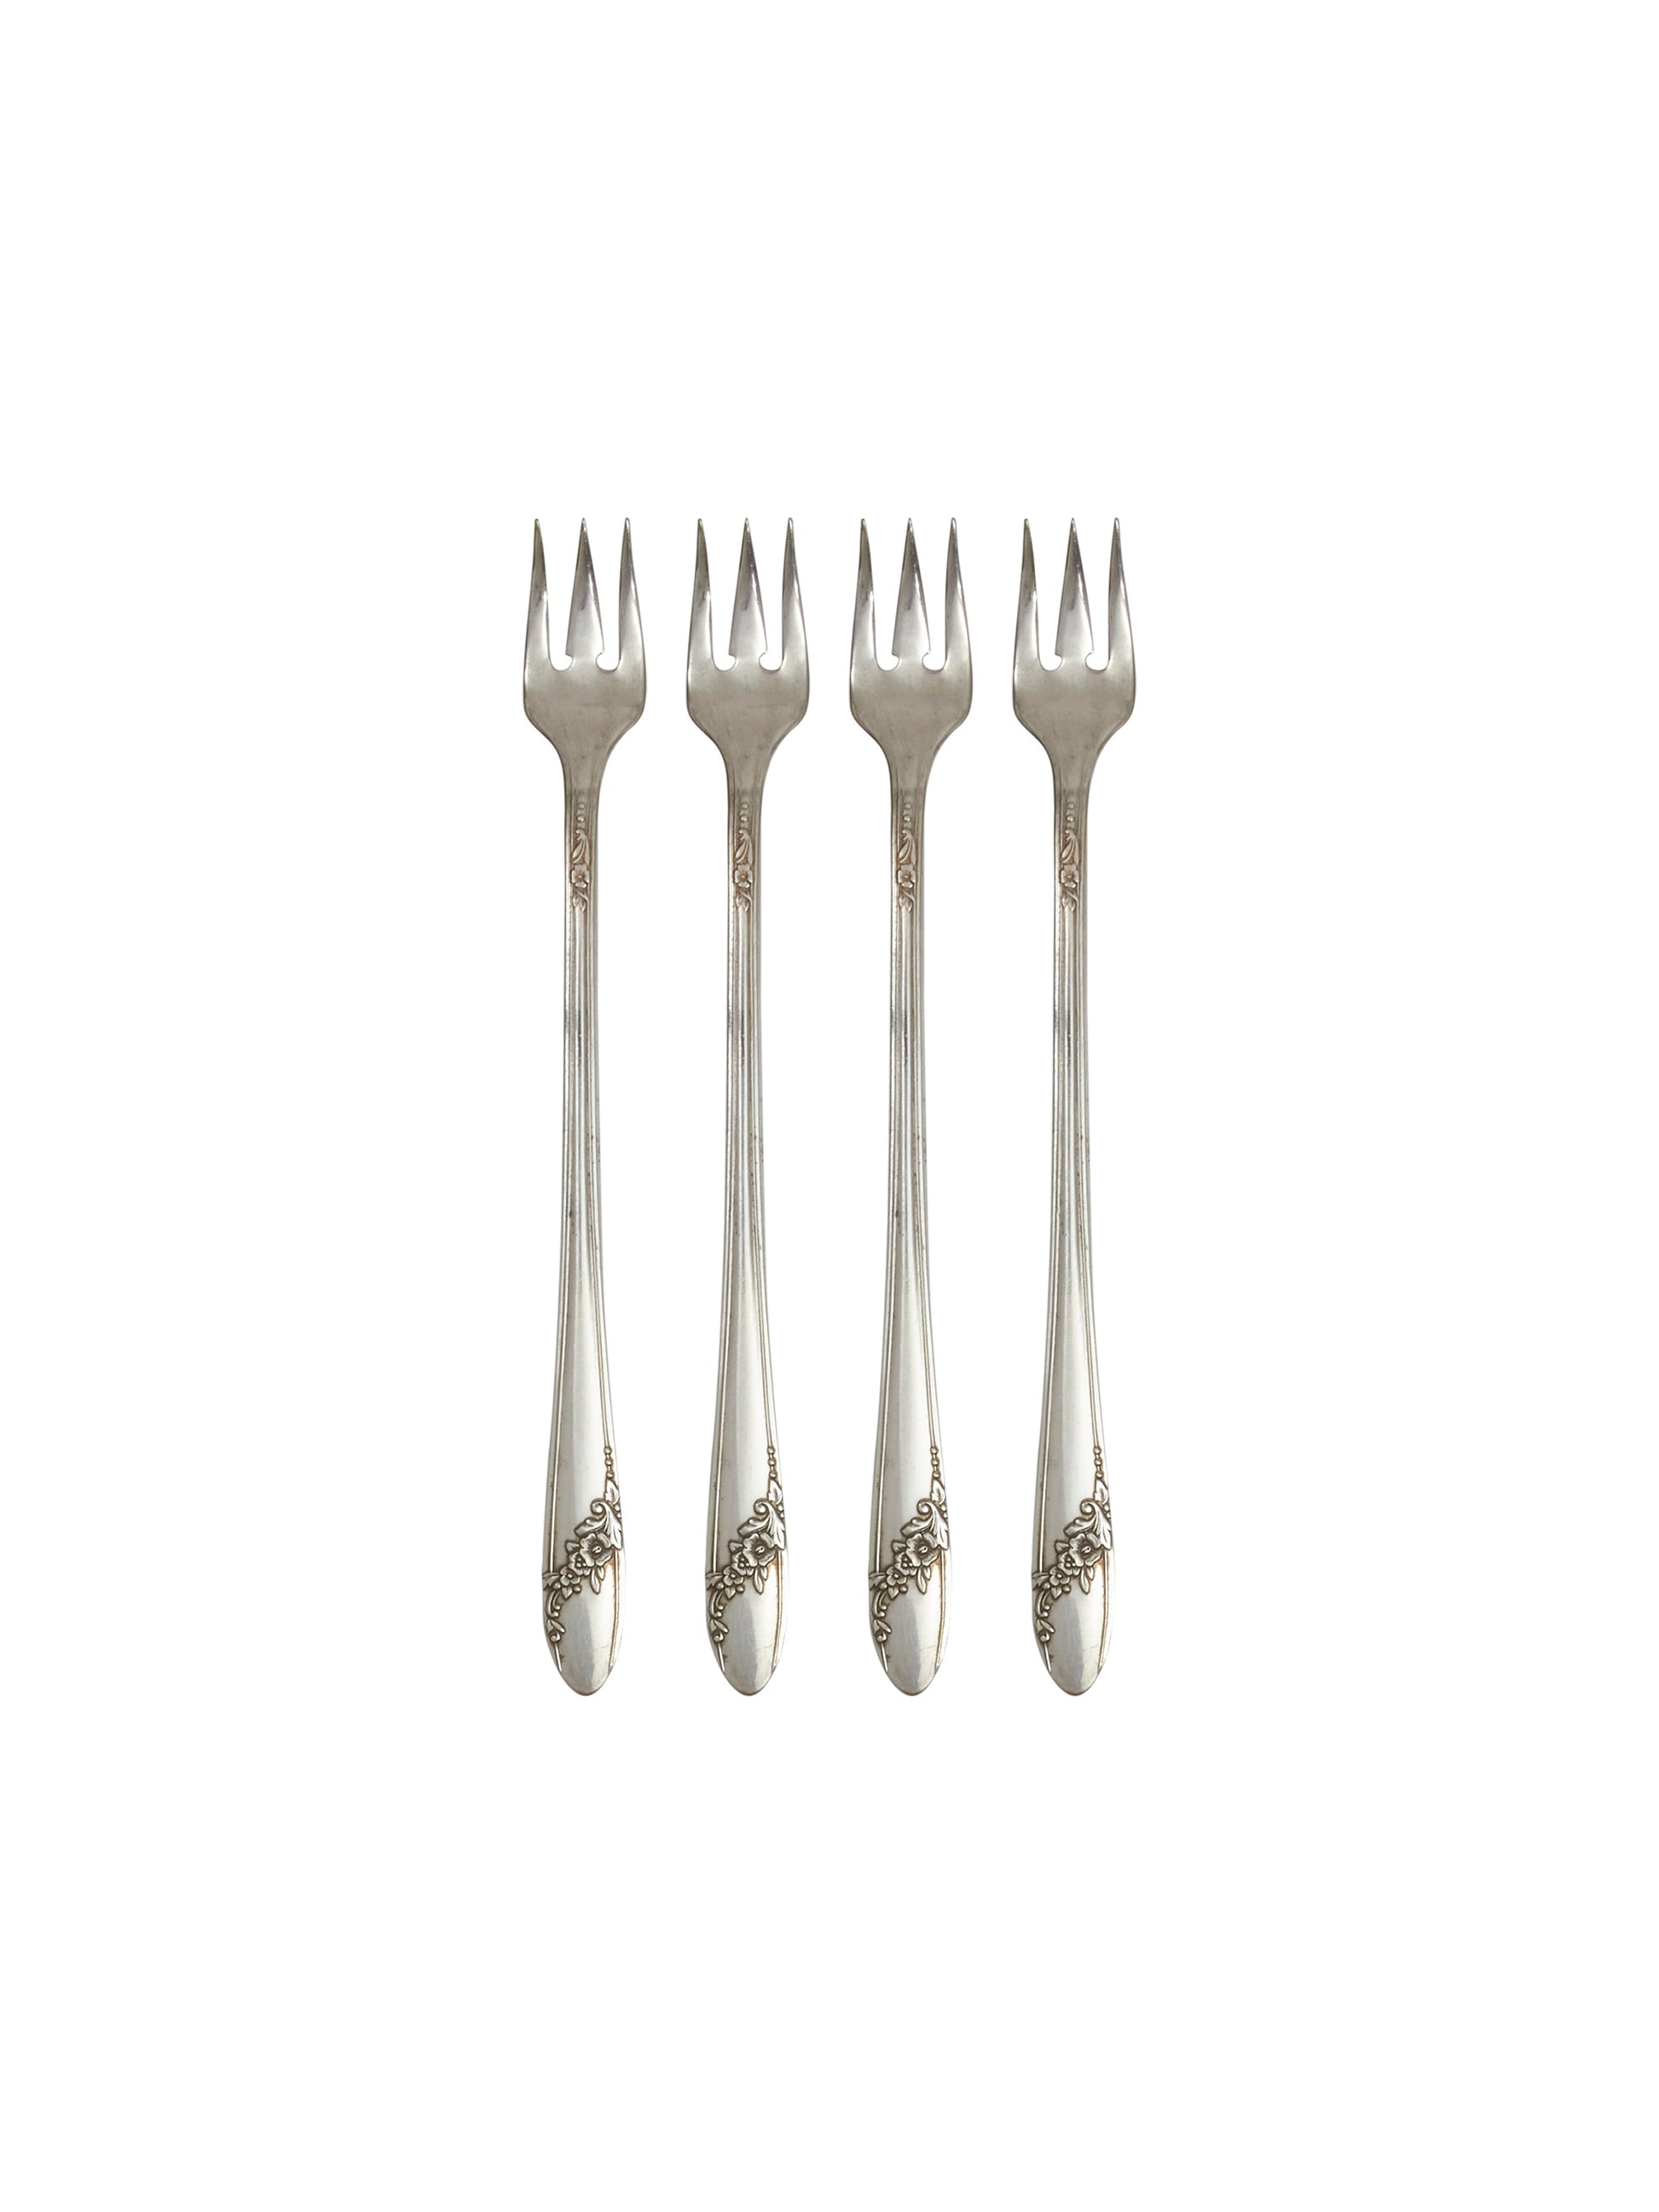 Vintage 1950s Oneida Endearable Oyster Forks Set of Four Weston Table